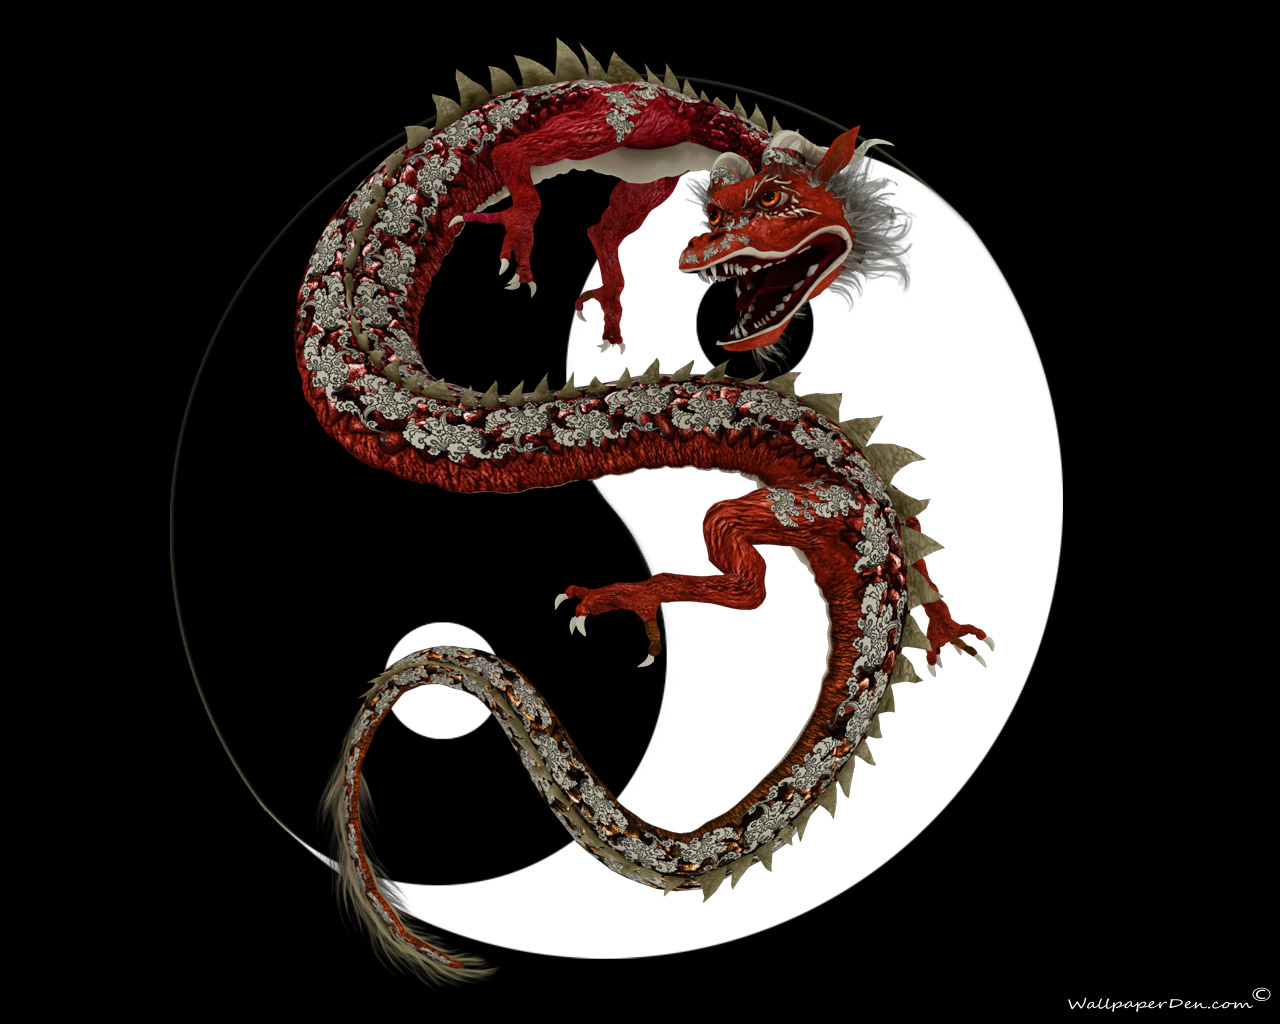 Chinese Dragons 55 Wallpaper Background Hd With Resolutions 12801024